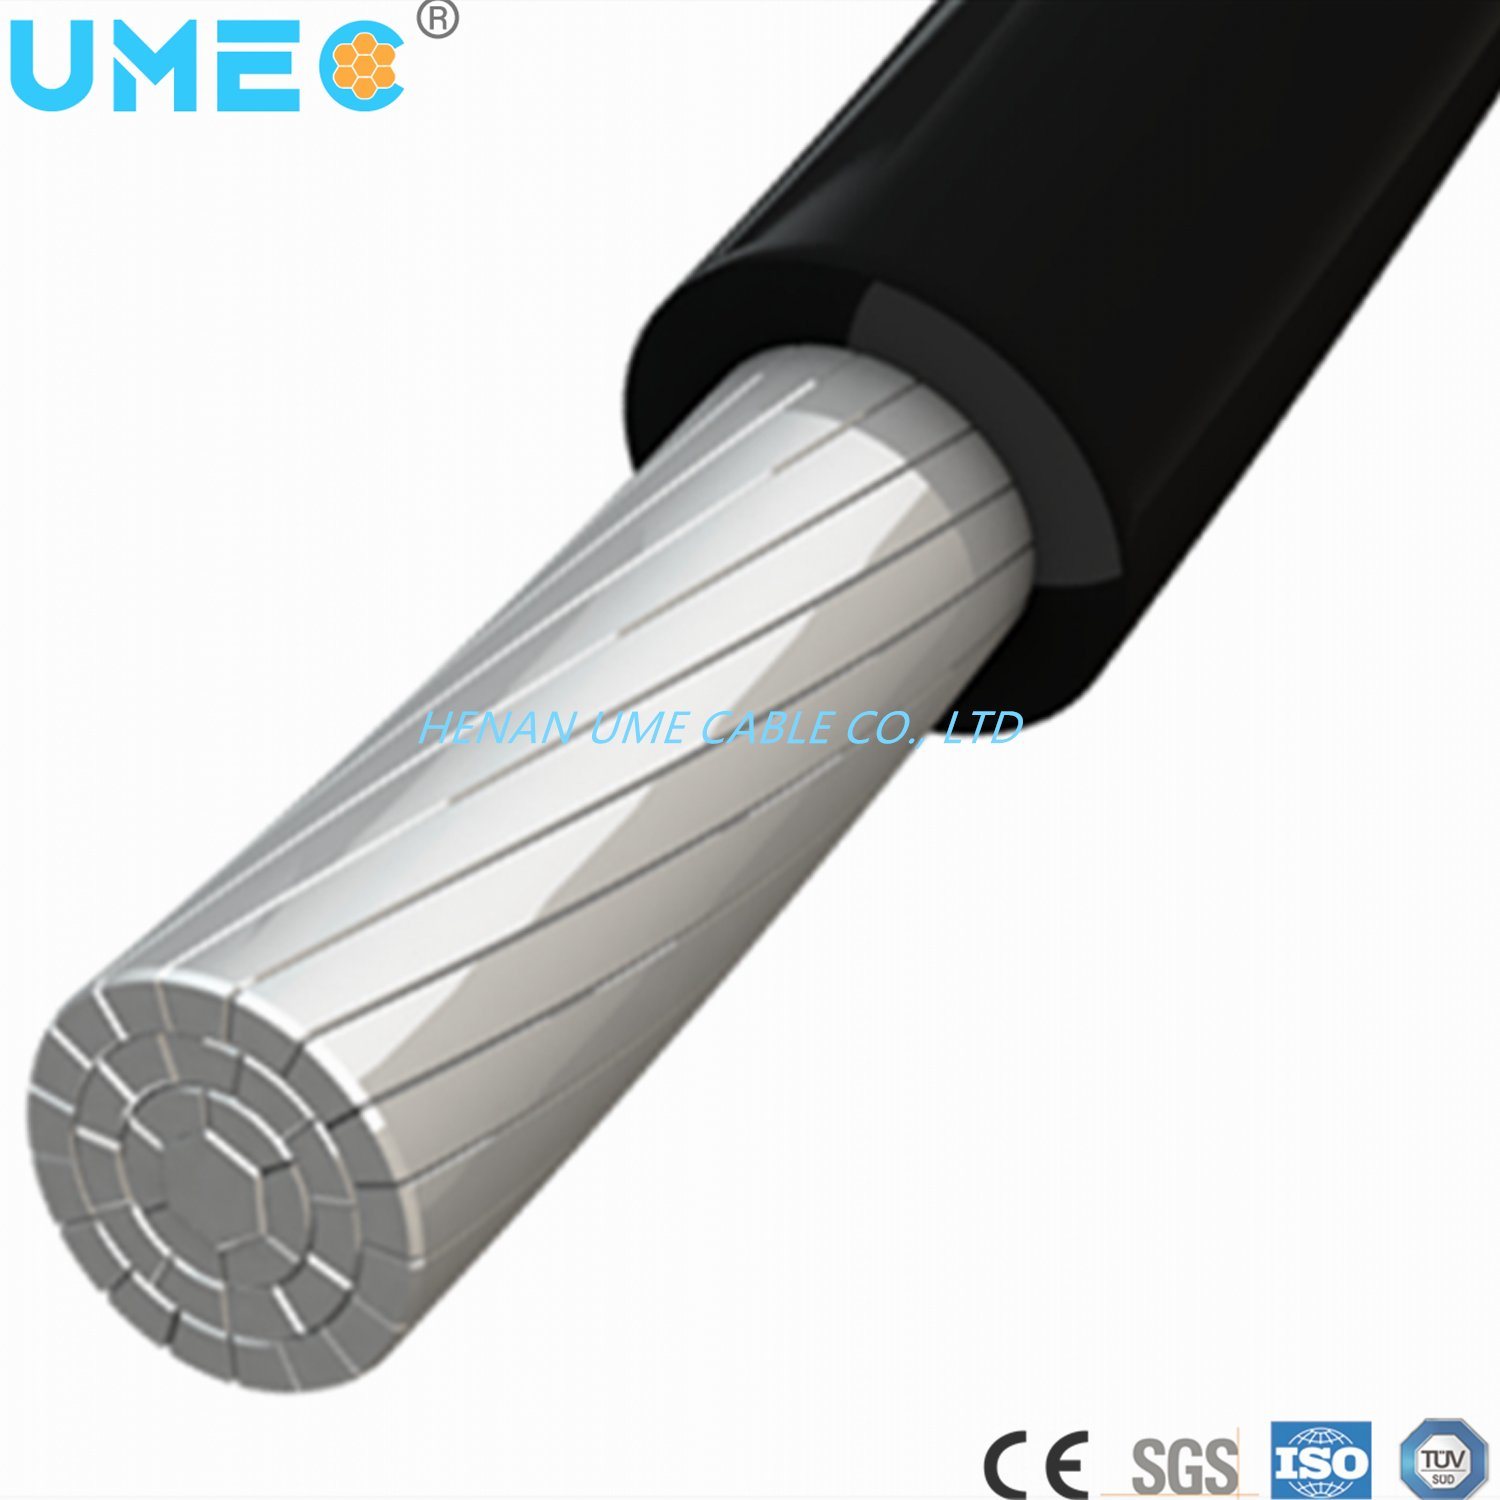 XLPE Insulation for Underground Wire Special Cable